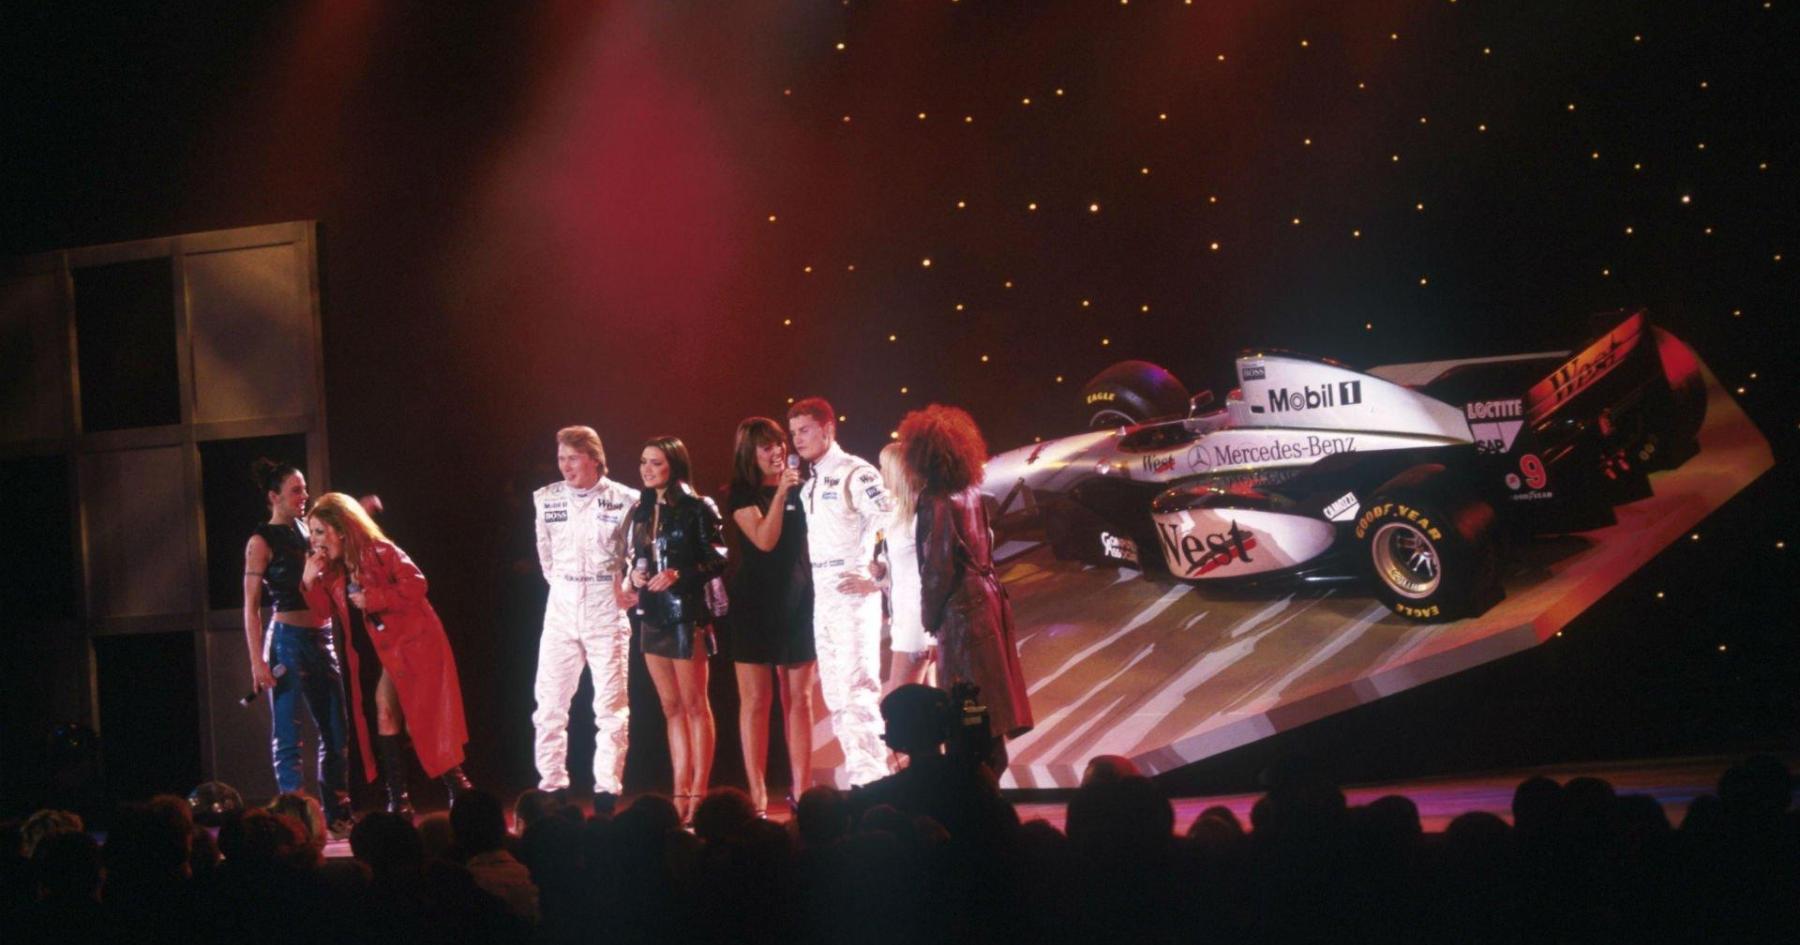 The most spectacular F1 team car launches